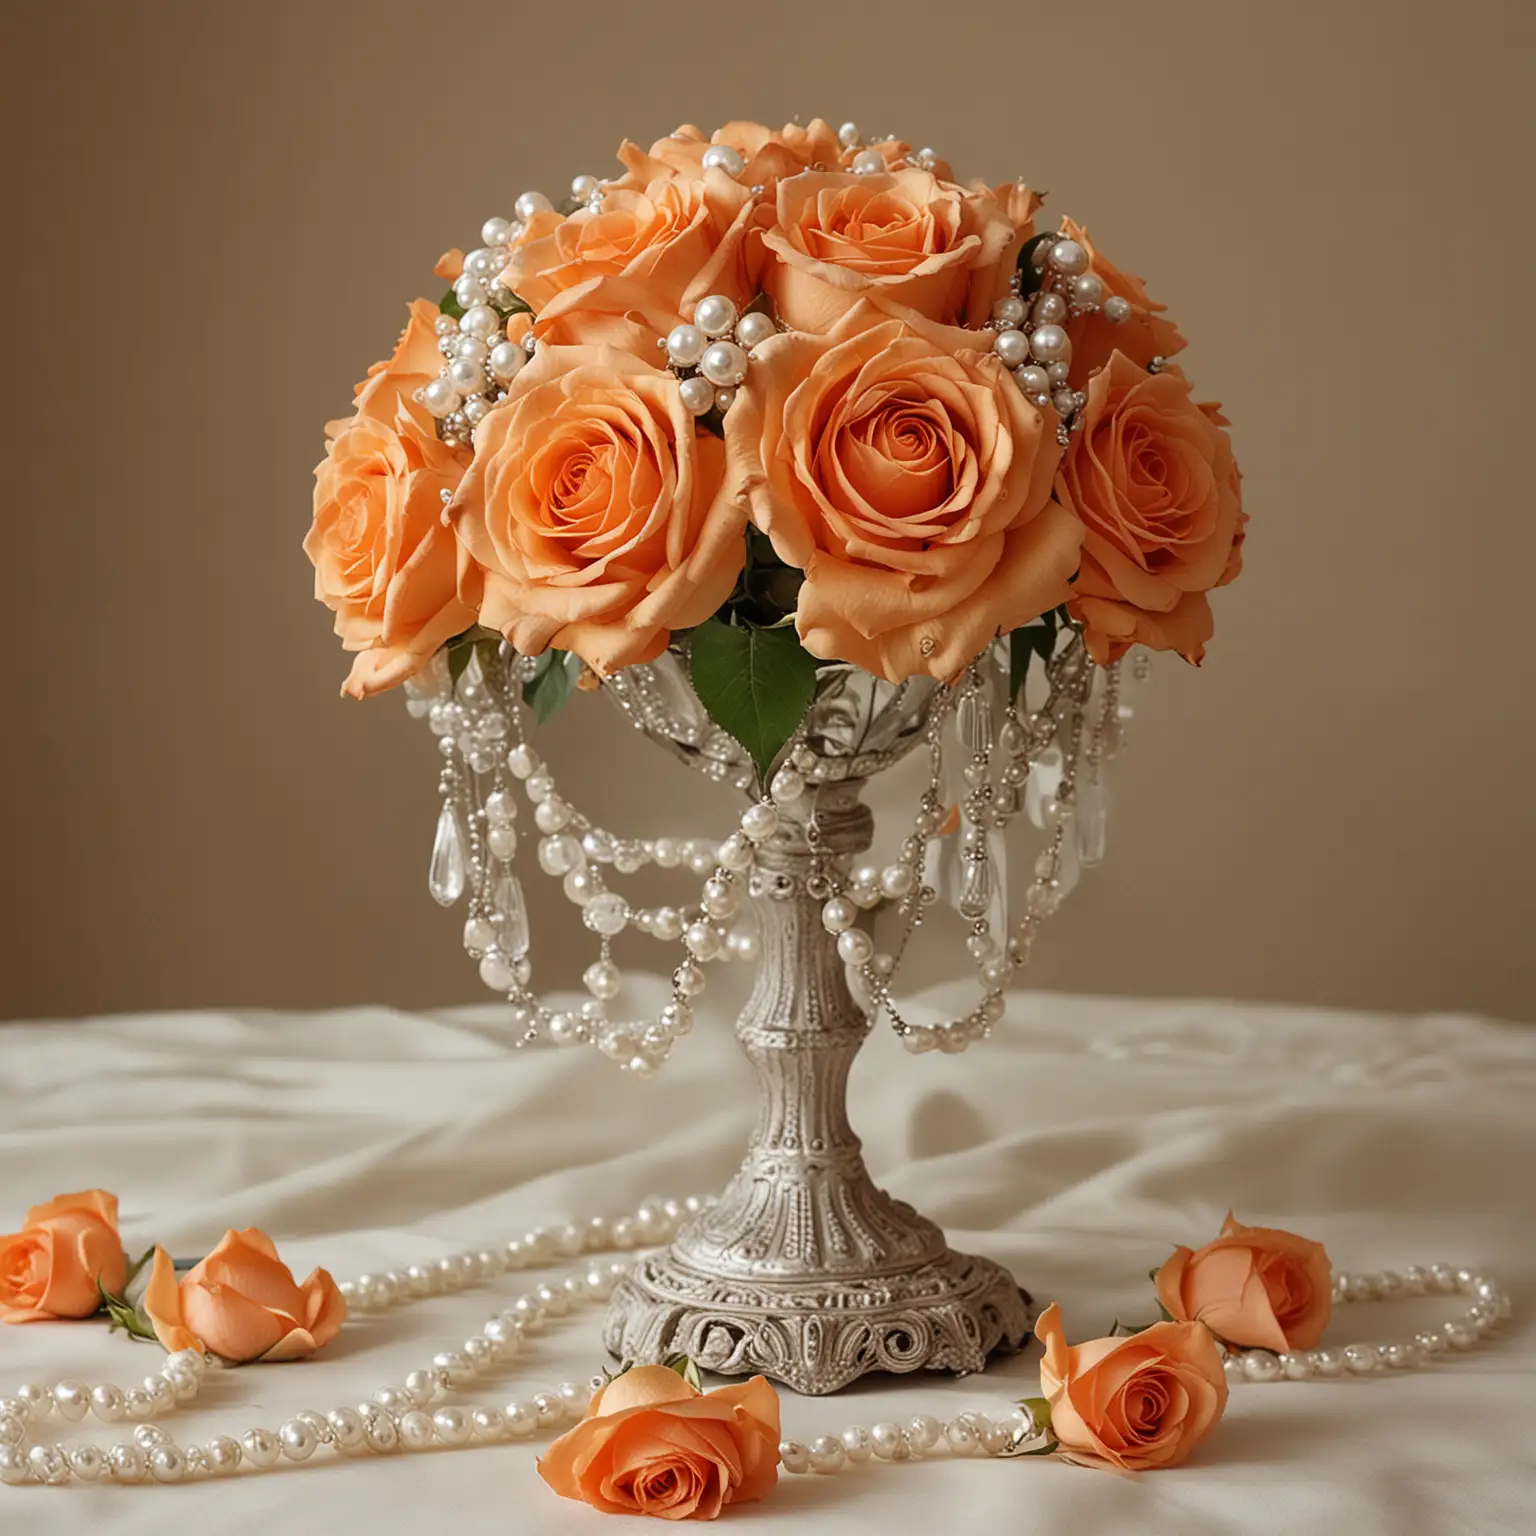 Vintage-Wedding-Centerpiece-with-Orange-Roses-and-Pearls